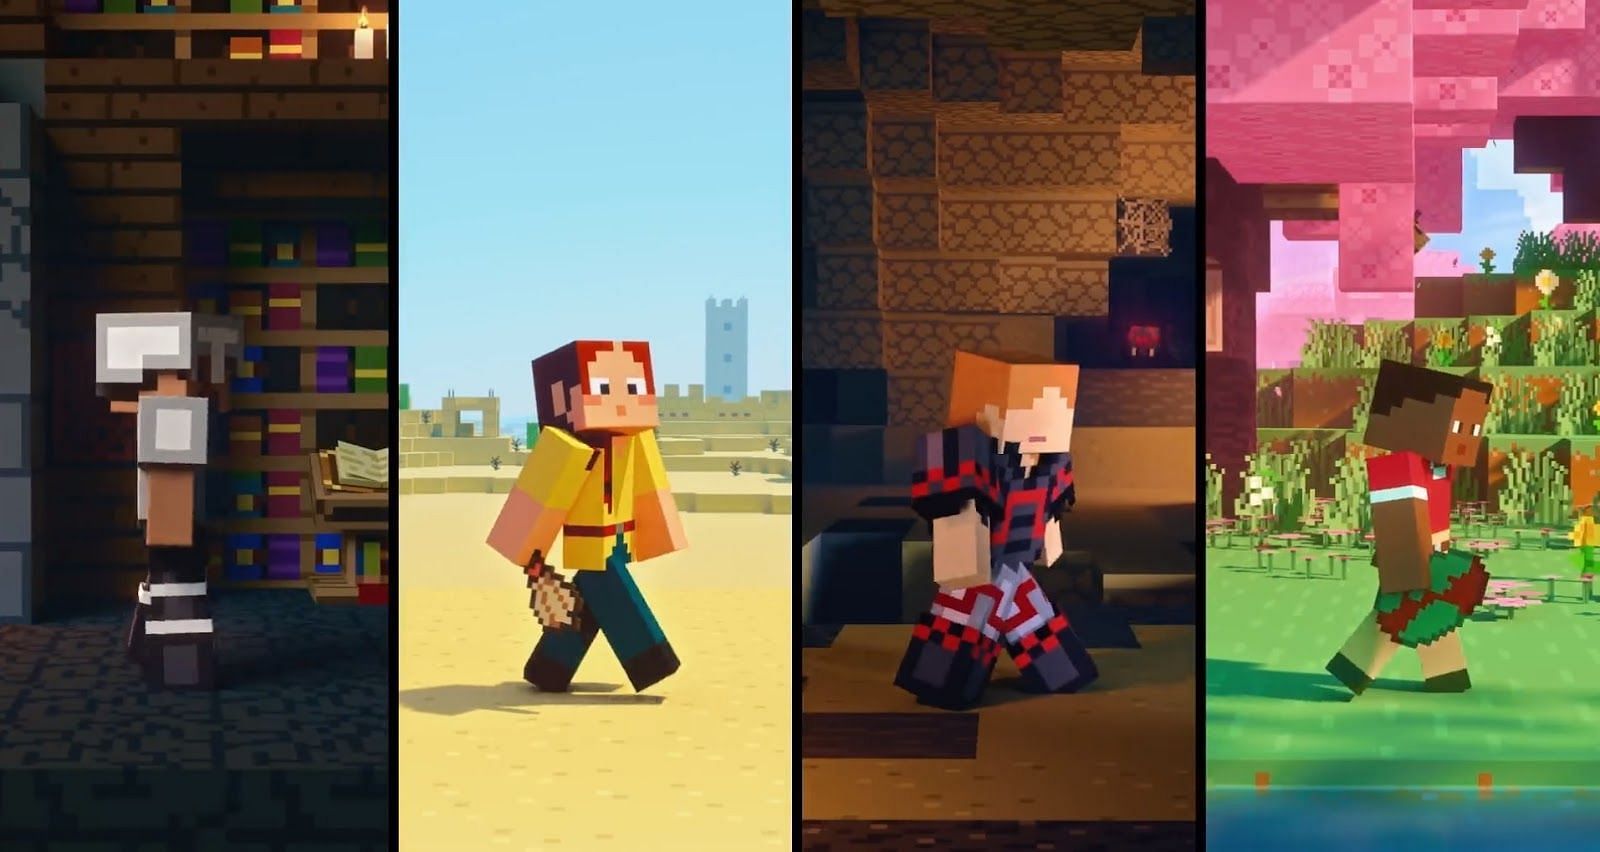 Minecraft 1.20 Trails & Tales update: Features, theme, and everything we  know